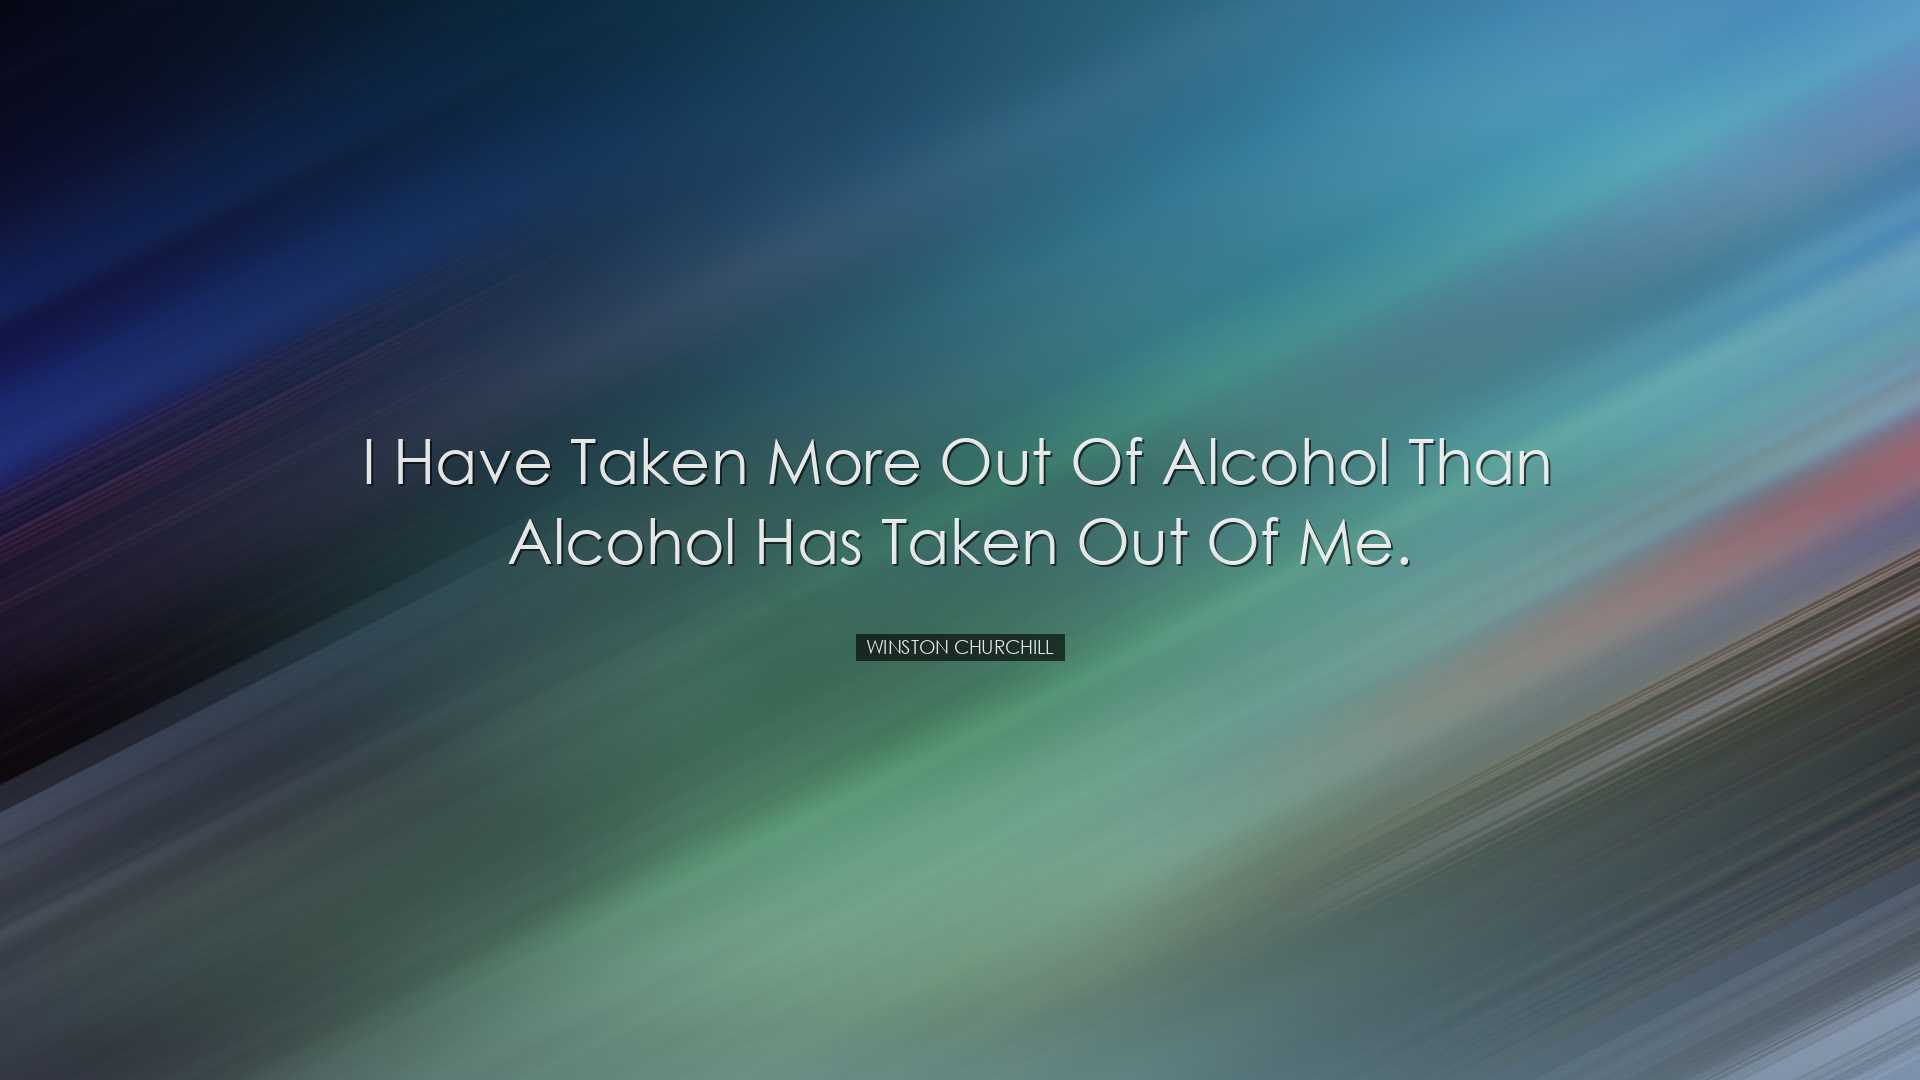 I have taken more out of alcohol than alcohol has taken out of me.